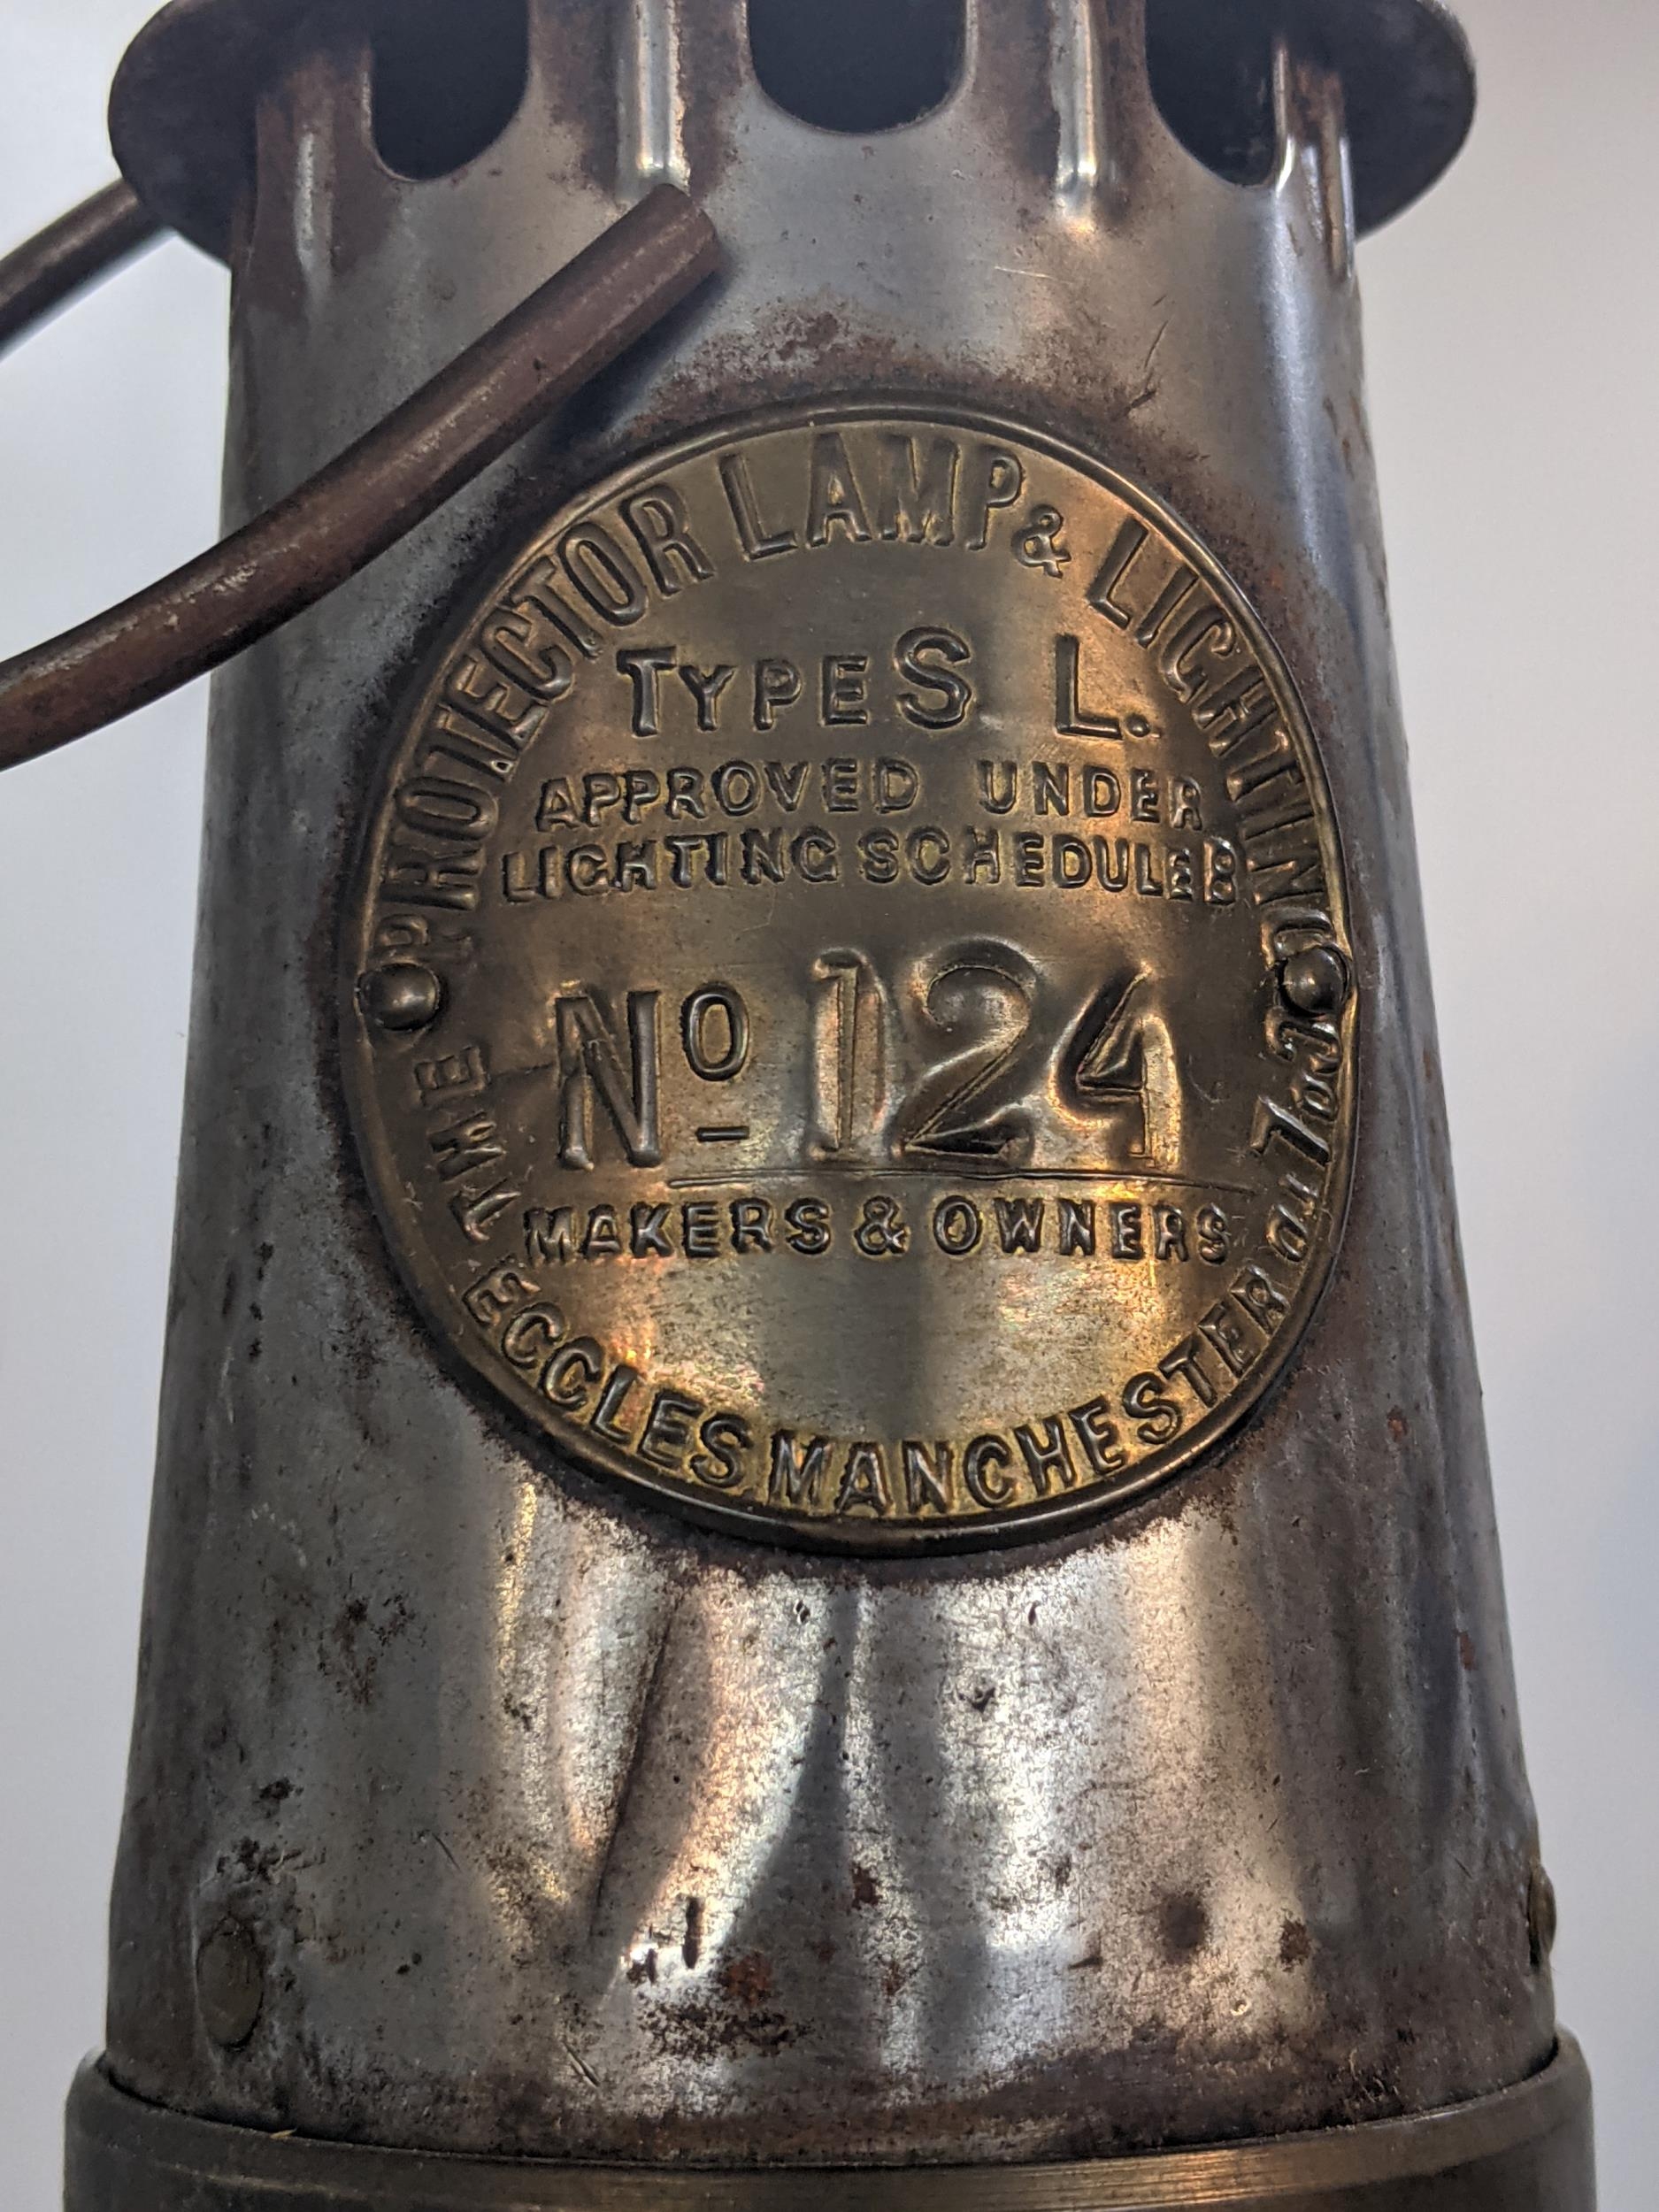 A No 124 Makers & Owners type SL miners lamp, Location: 8:1, Location: - Image 2 of 2